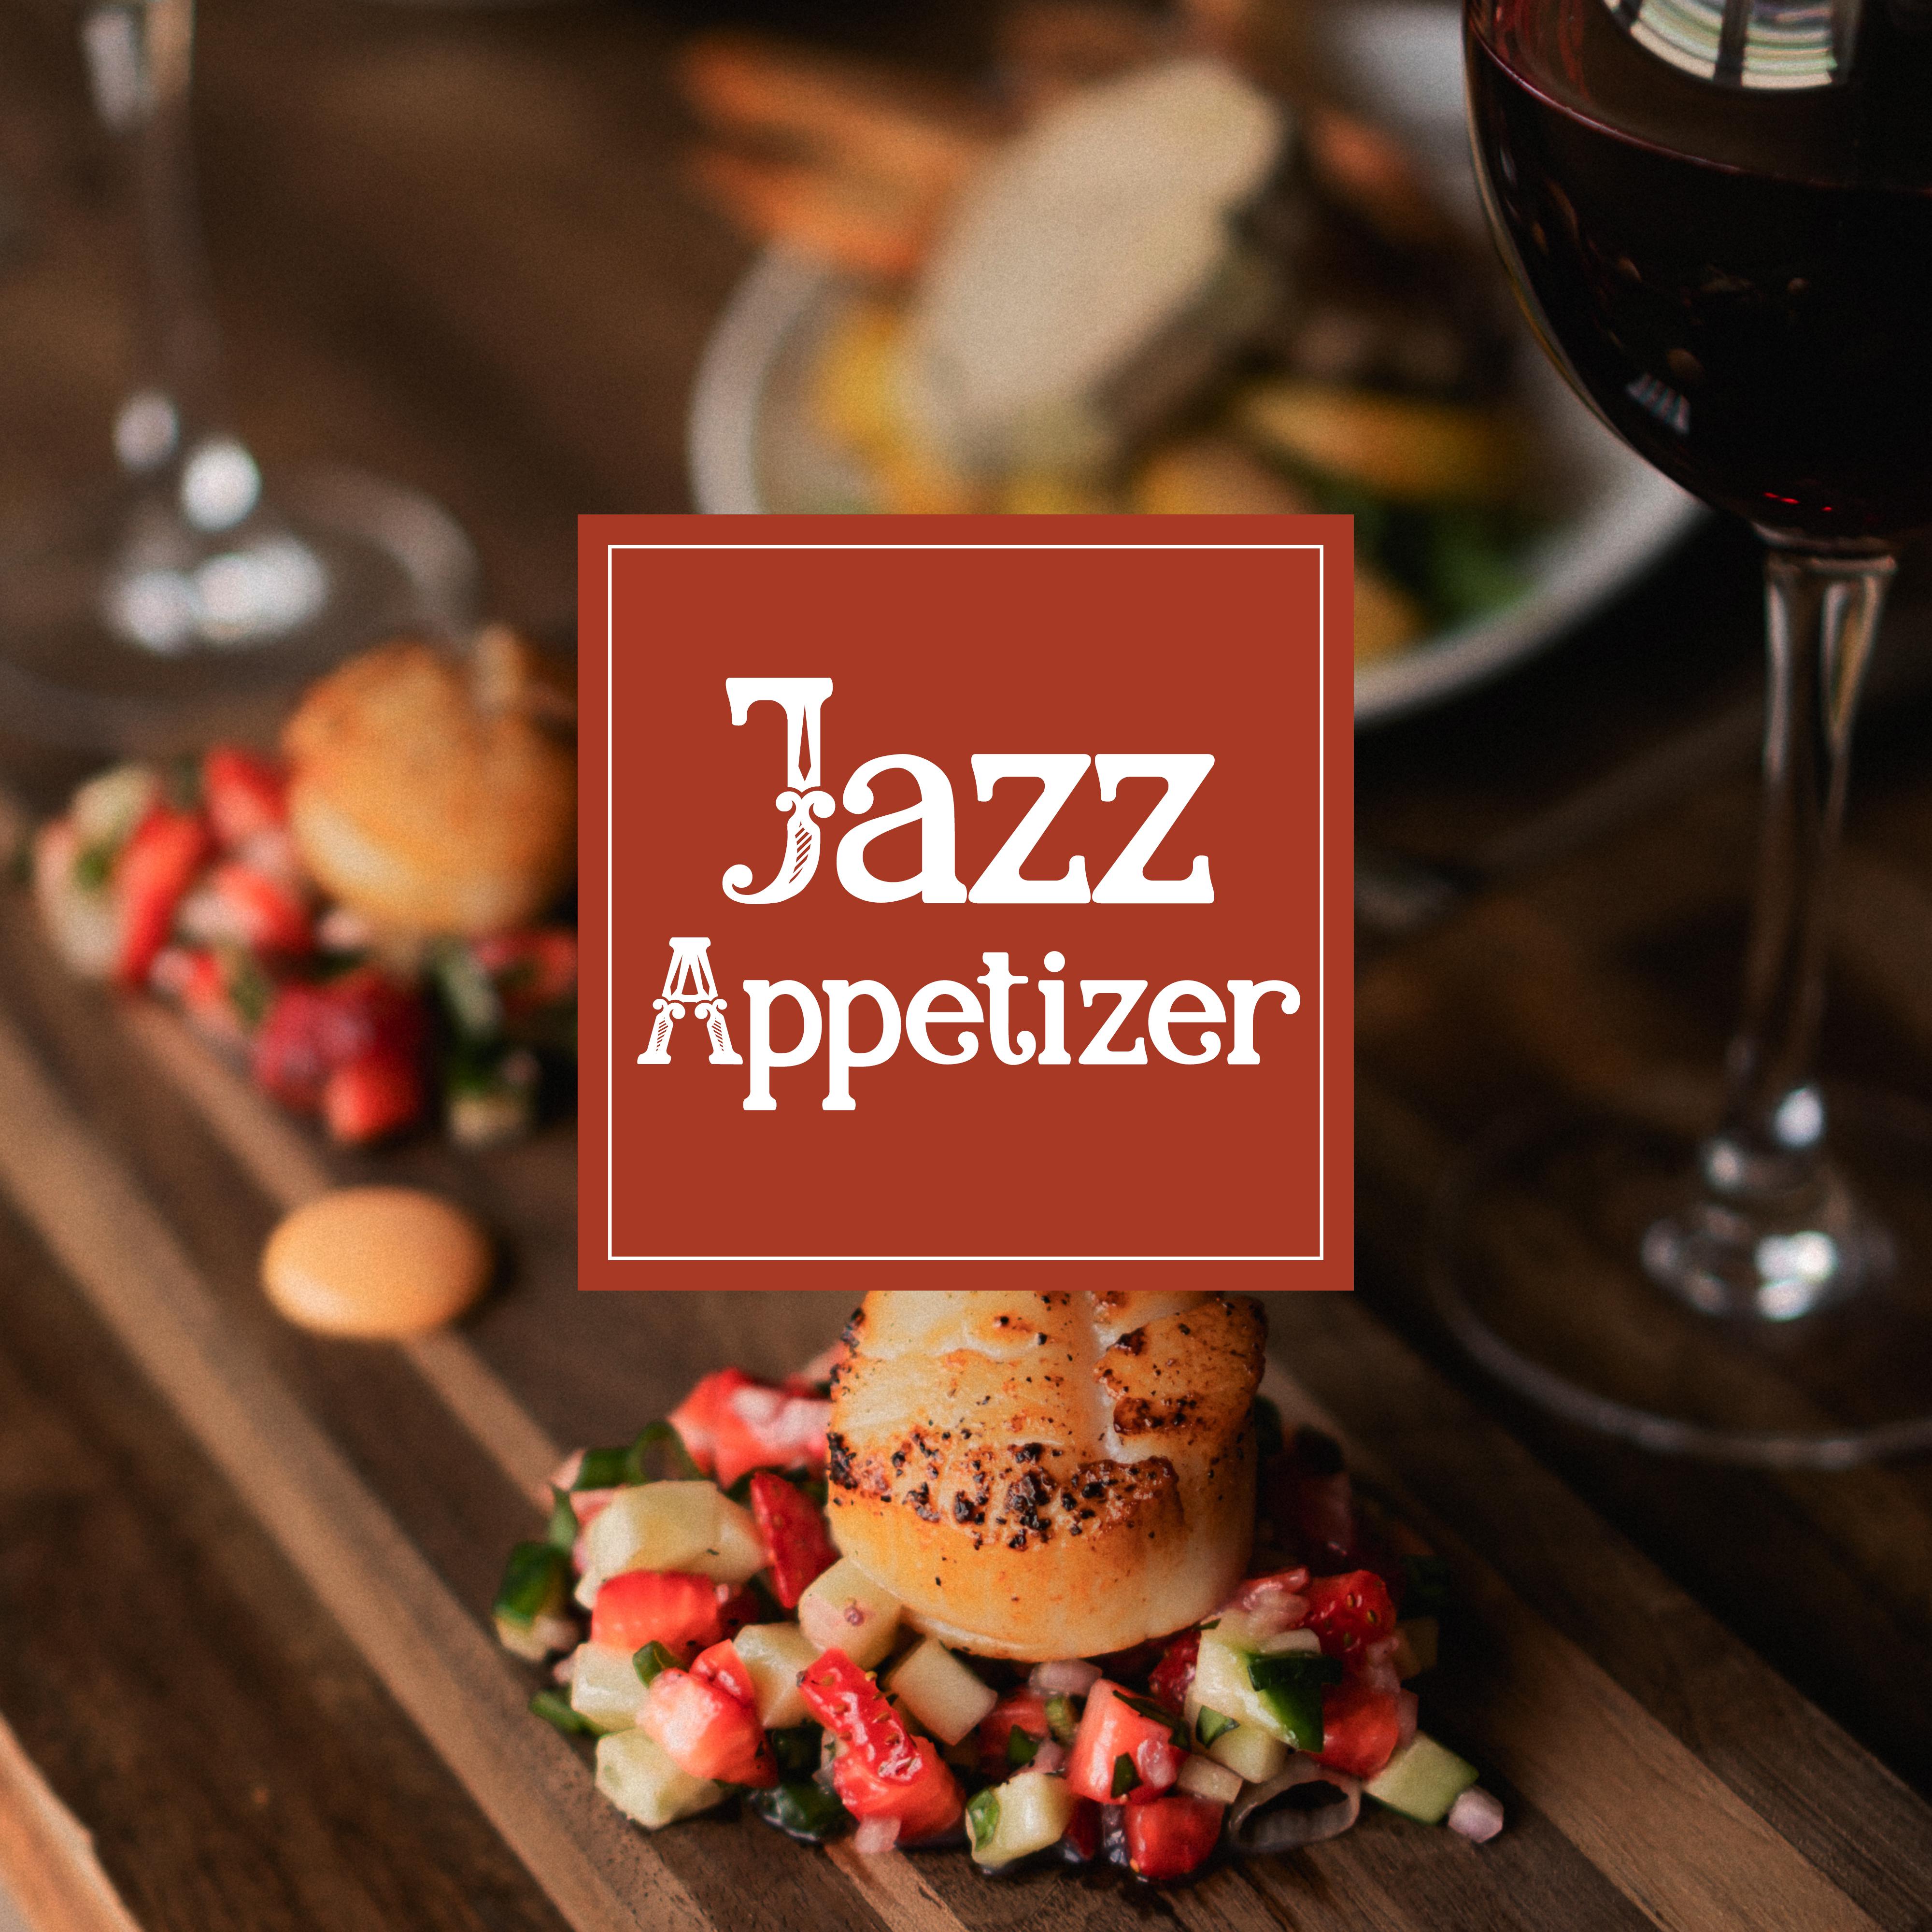 Jazz Appetizer - Music for Everyday Meals and Dishes